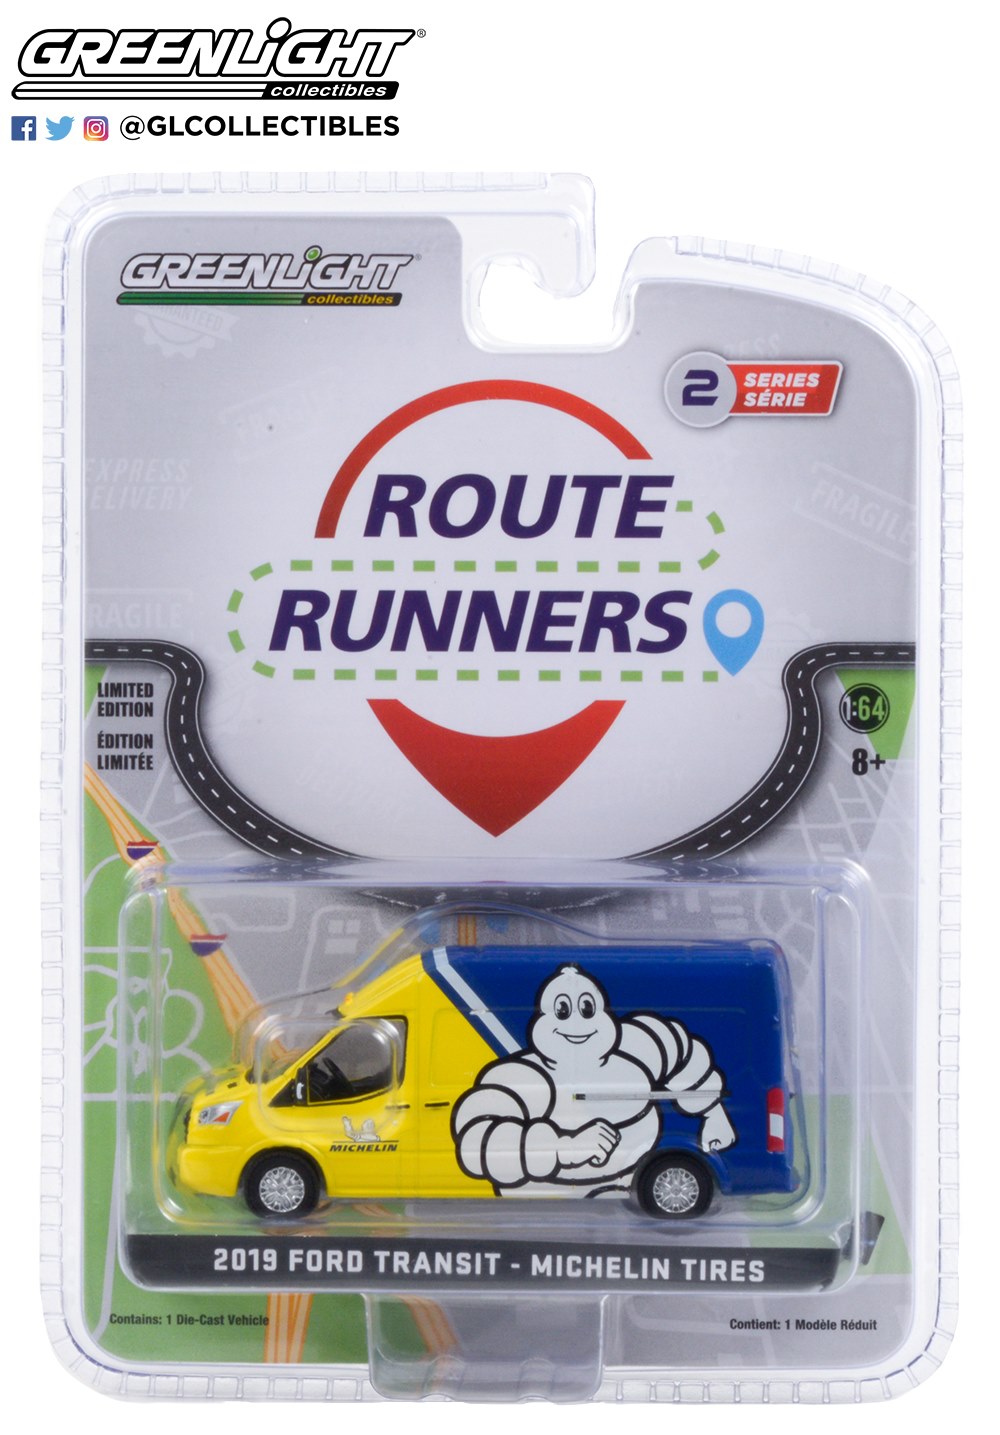 Route Runners Series 2 greenlight